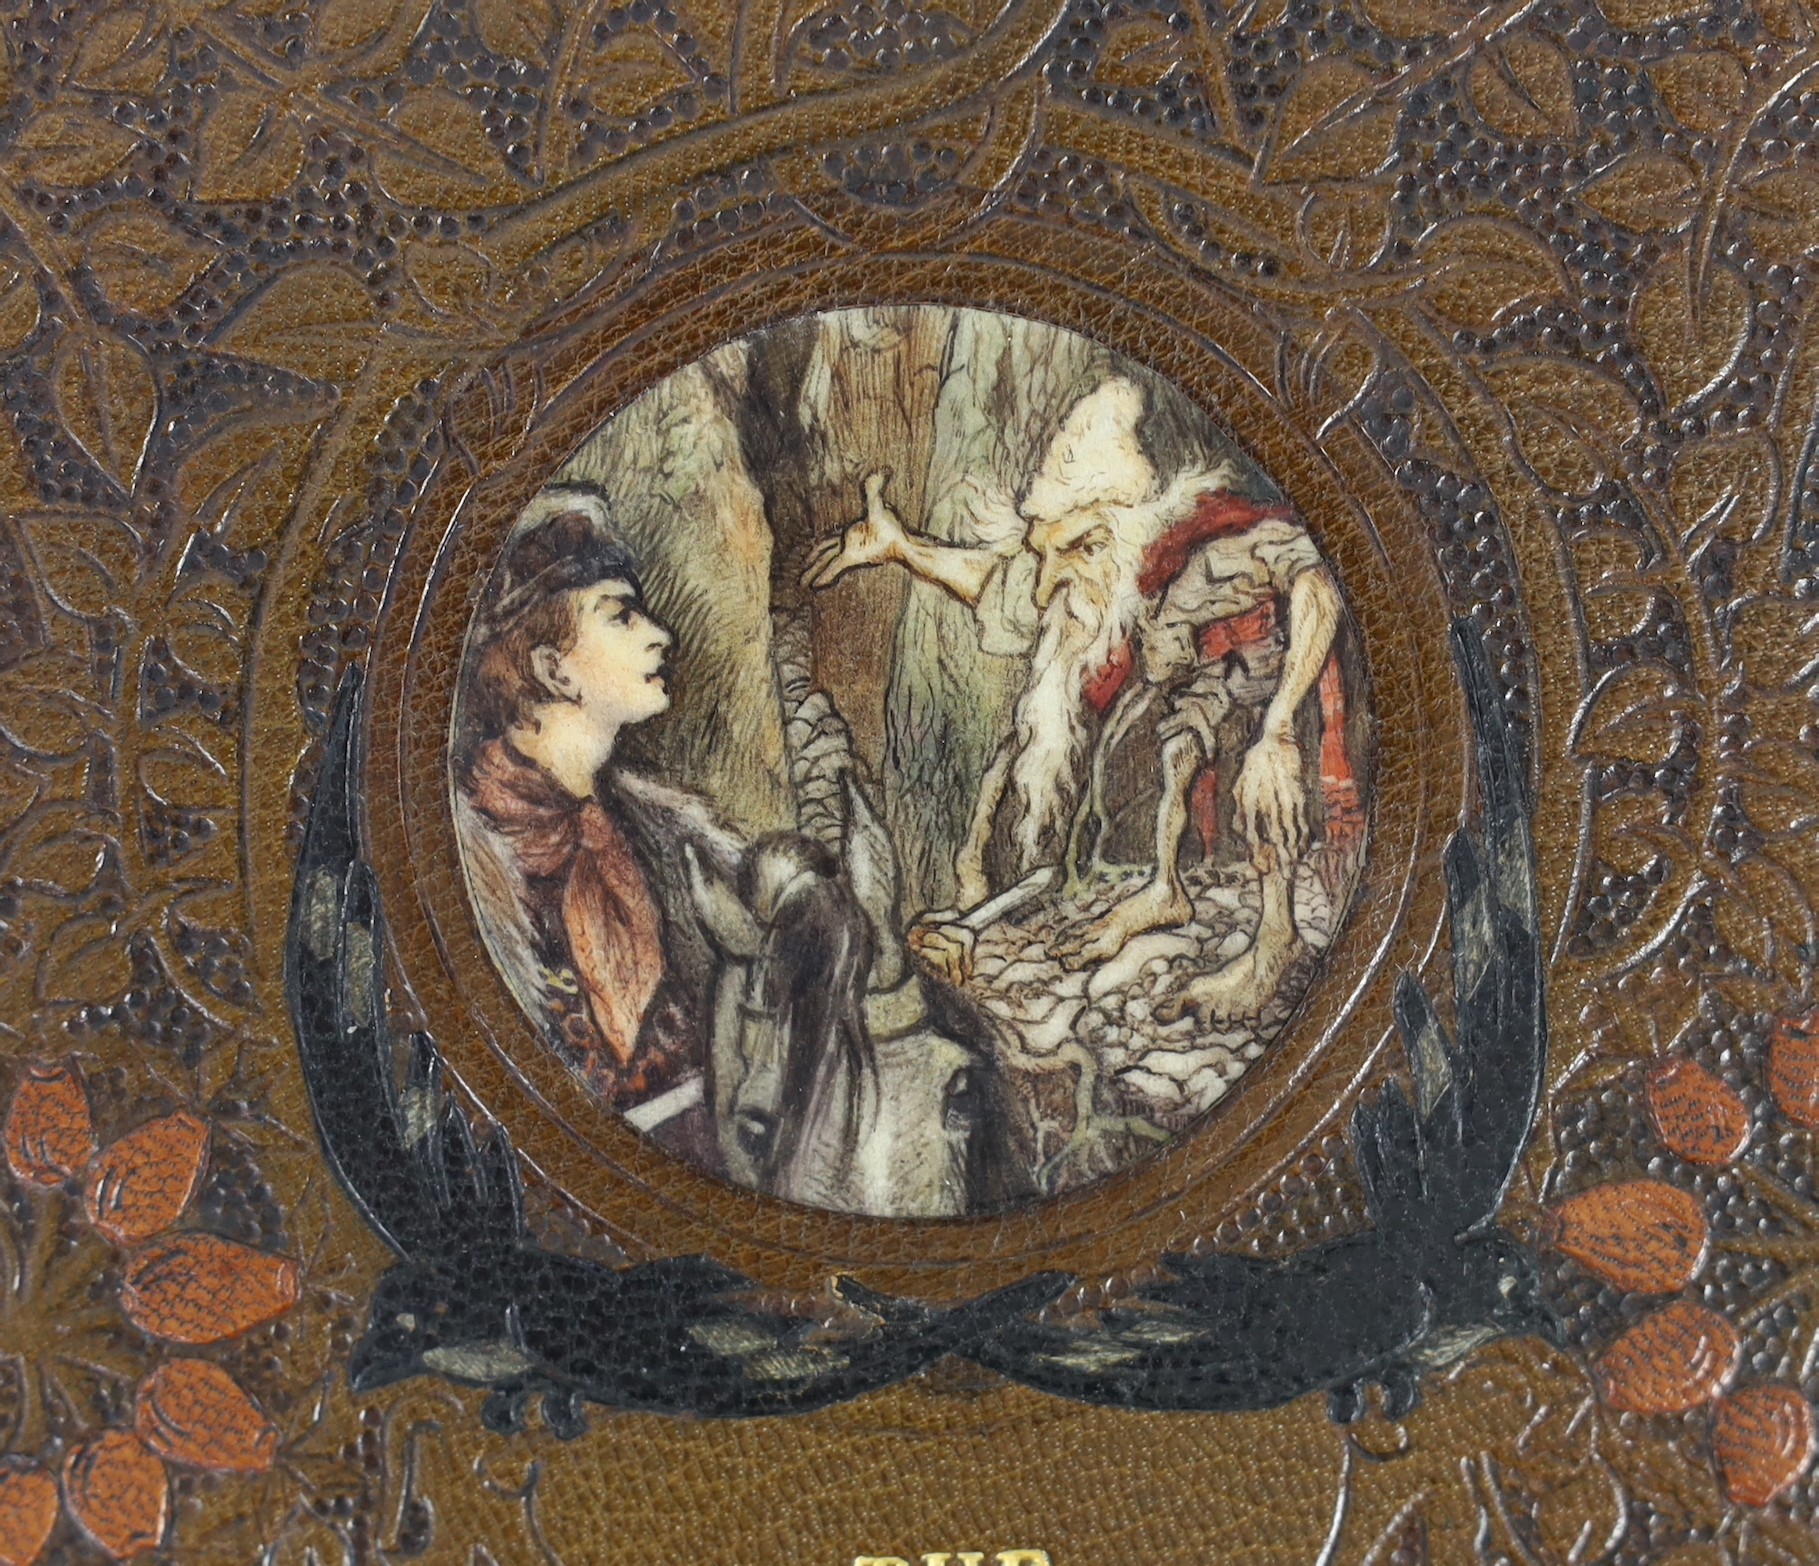 Arthur Rackham original paintings - Grimm Brothers - The Fairy Tales of the Brothers Grimm, number 135 of 750 illustrated and signed by Arthur Rackham, with 40 tipped-in colour plates, translated by Mrs. Edgar Lucas, 4to